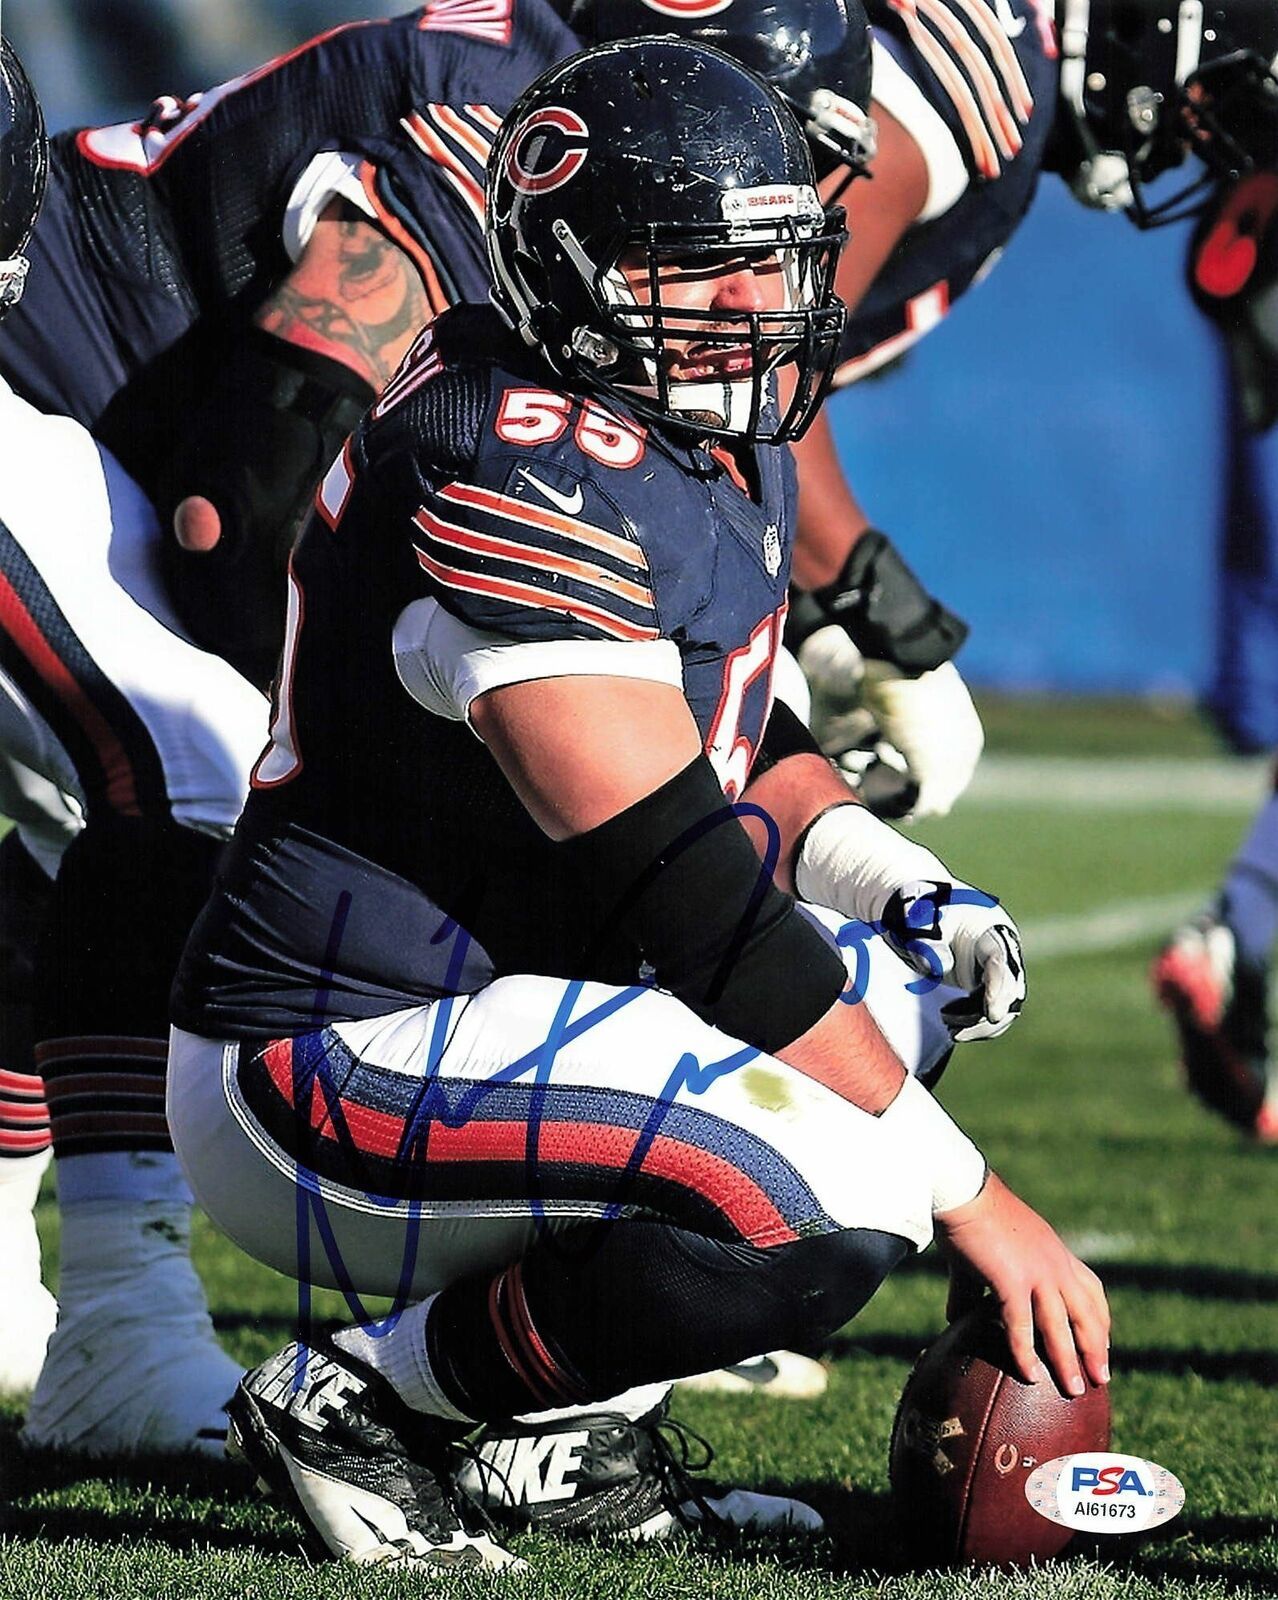 Primary image for HRONISS GRASU Signed 8x10 photo PSA/DNA Chicago Bears Autographed